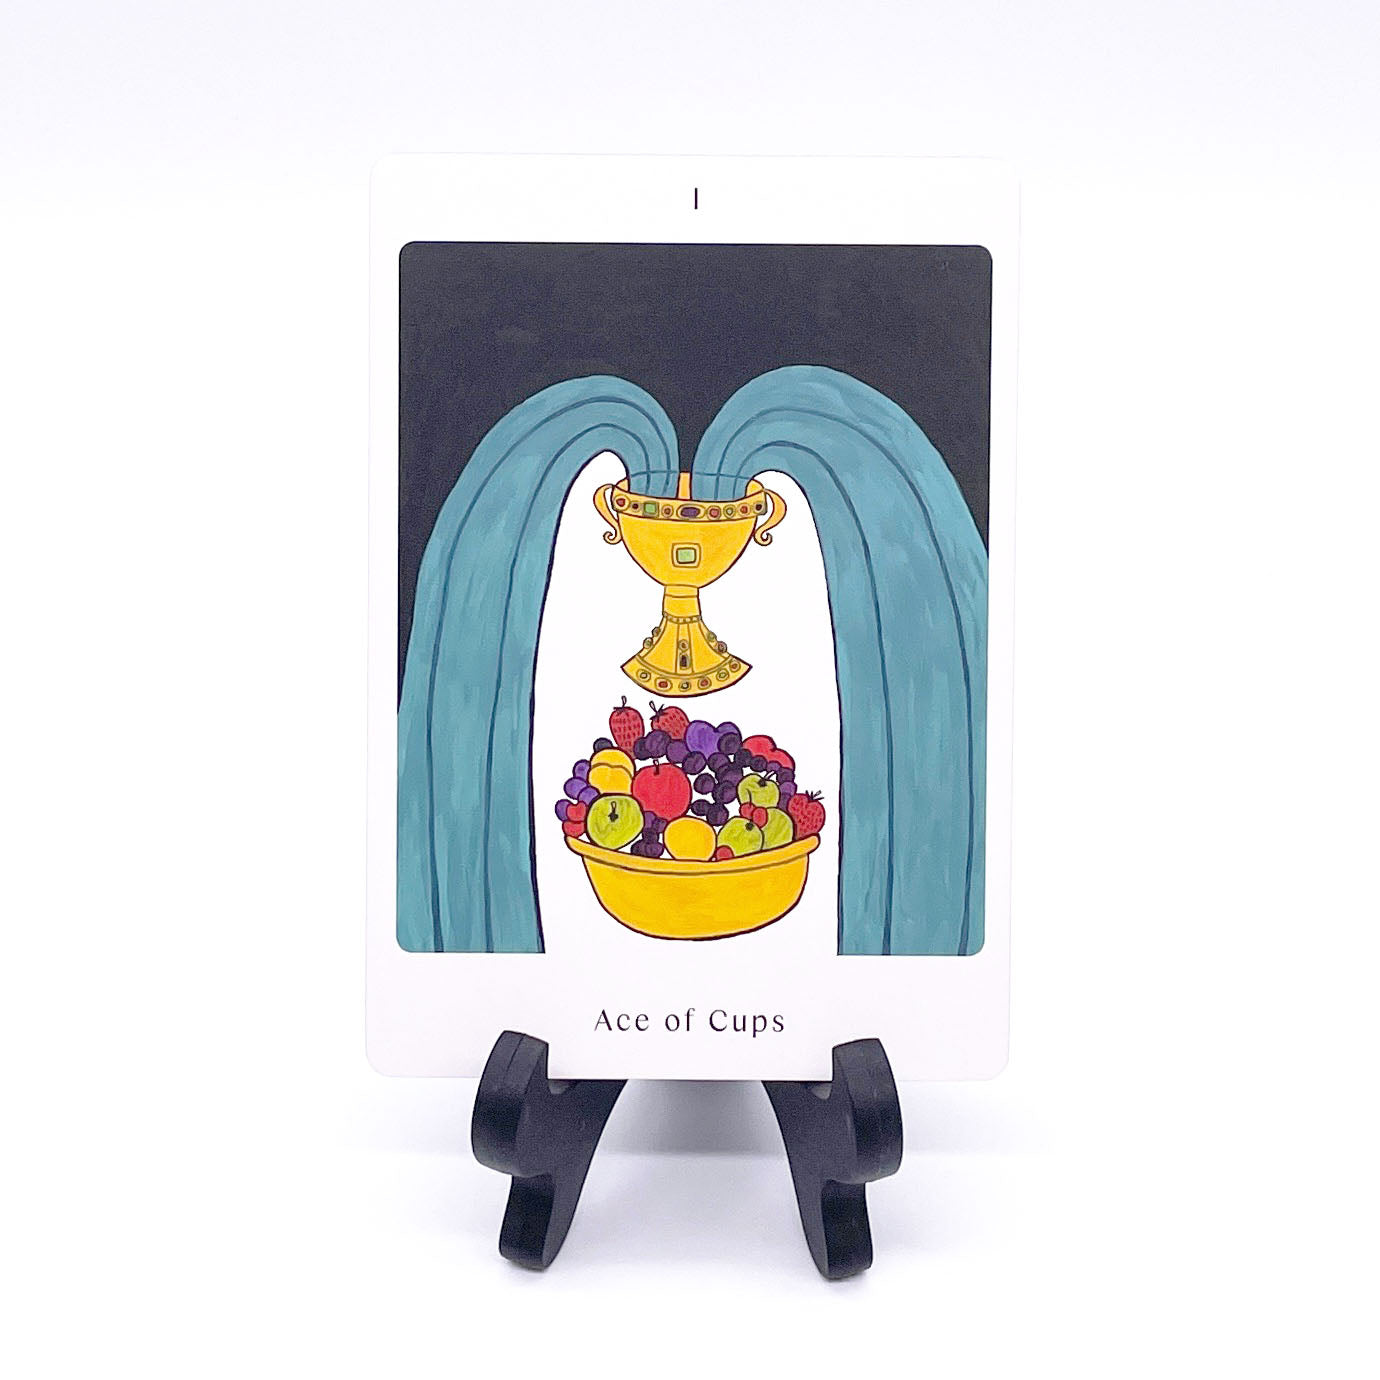 Ace of Cups card showing a fountain of teal water pouring from a golden goblet hovering over a bowl filled with brightly colored fruit. Card is printed with the title and corresponding number "I".